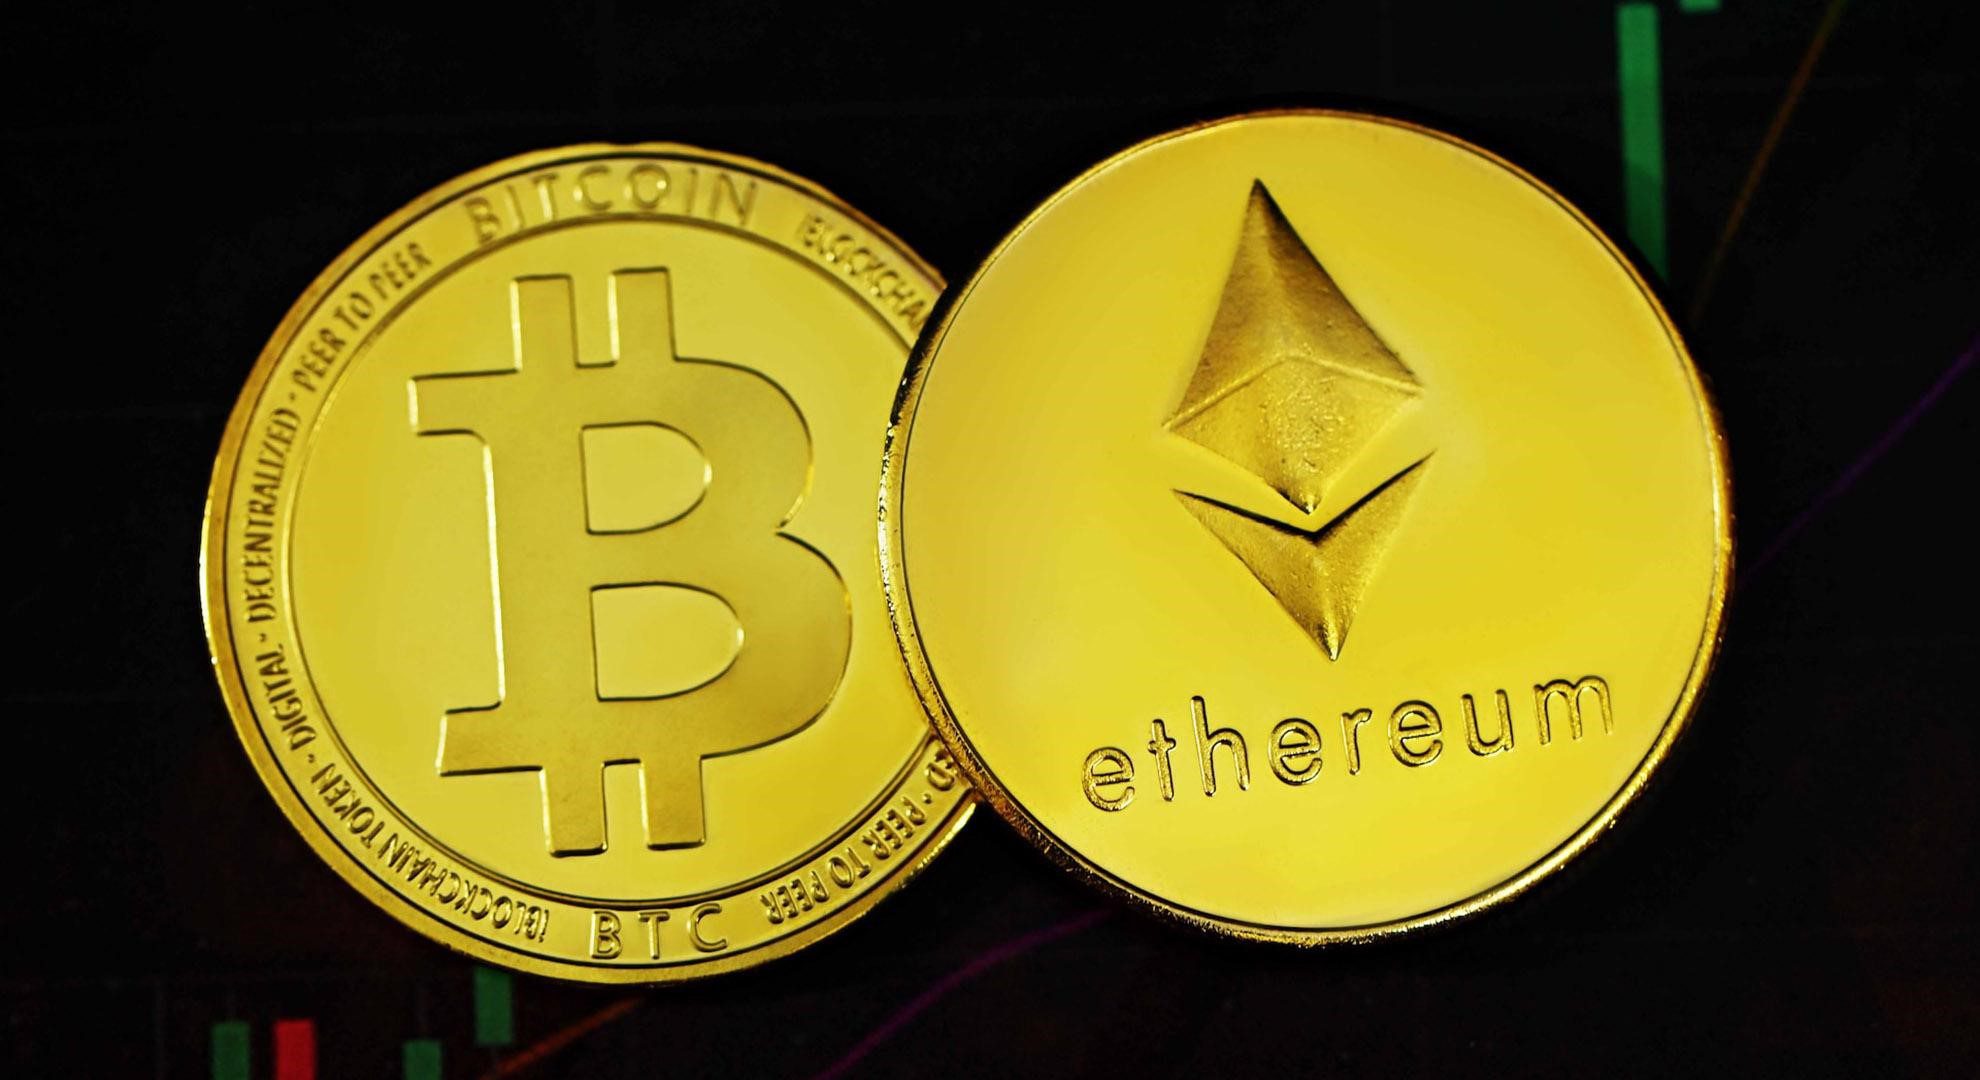 Two gold coins. One with the Bitcoin logo and one with the Ethereum logo.